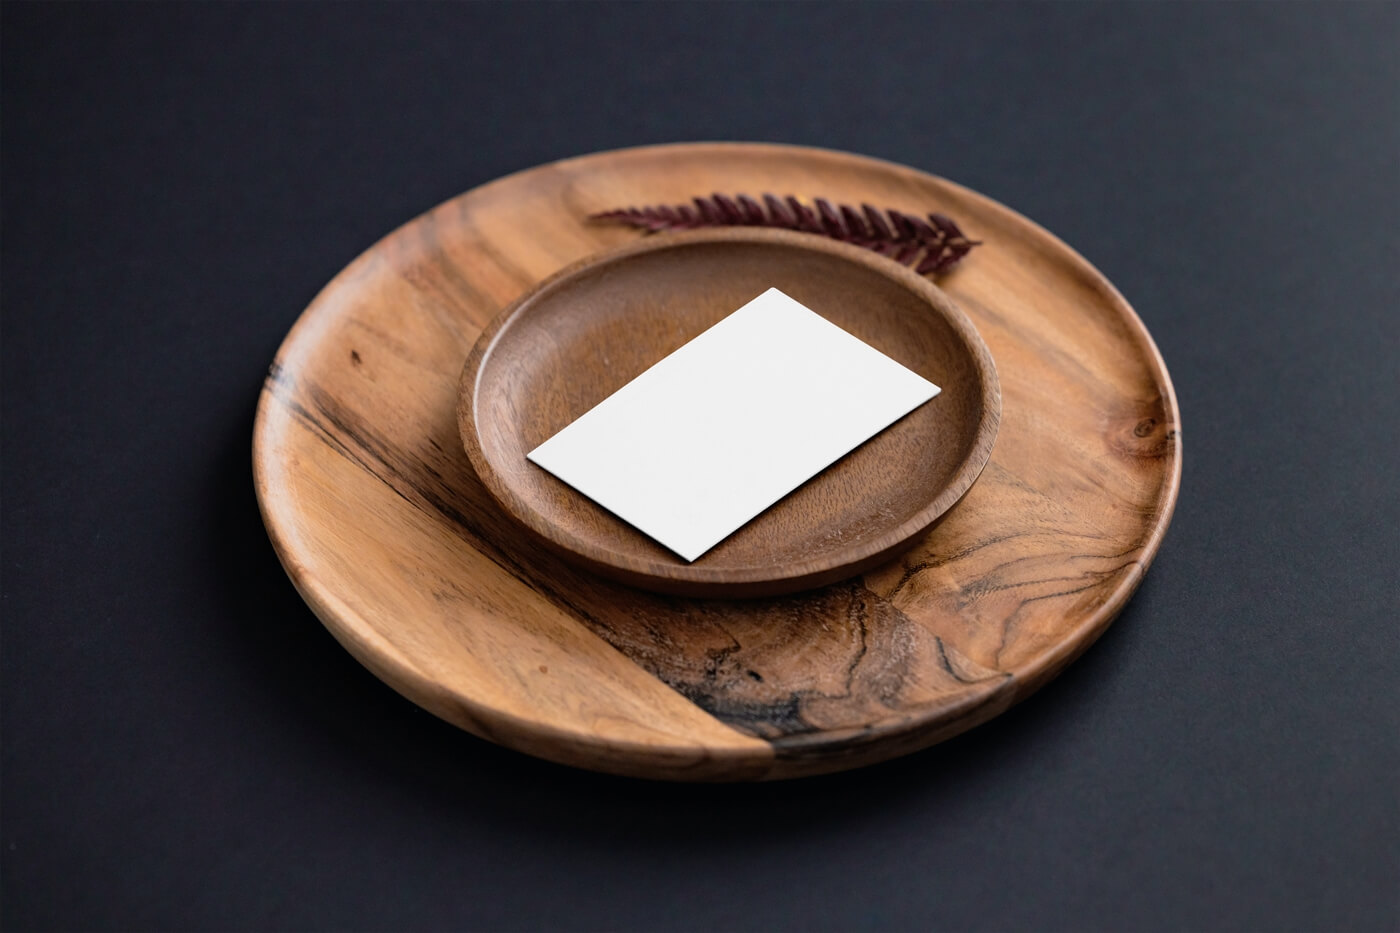  Artistic Perspective Business Card Mockup on Wooden Plate 